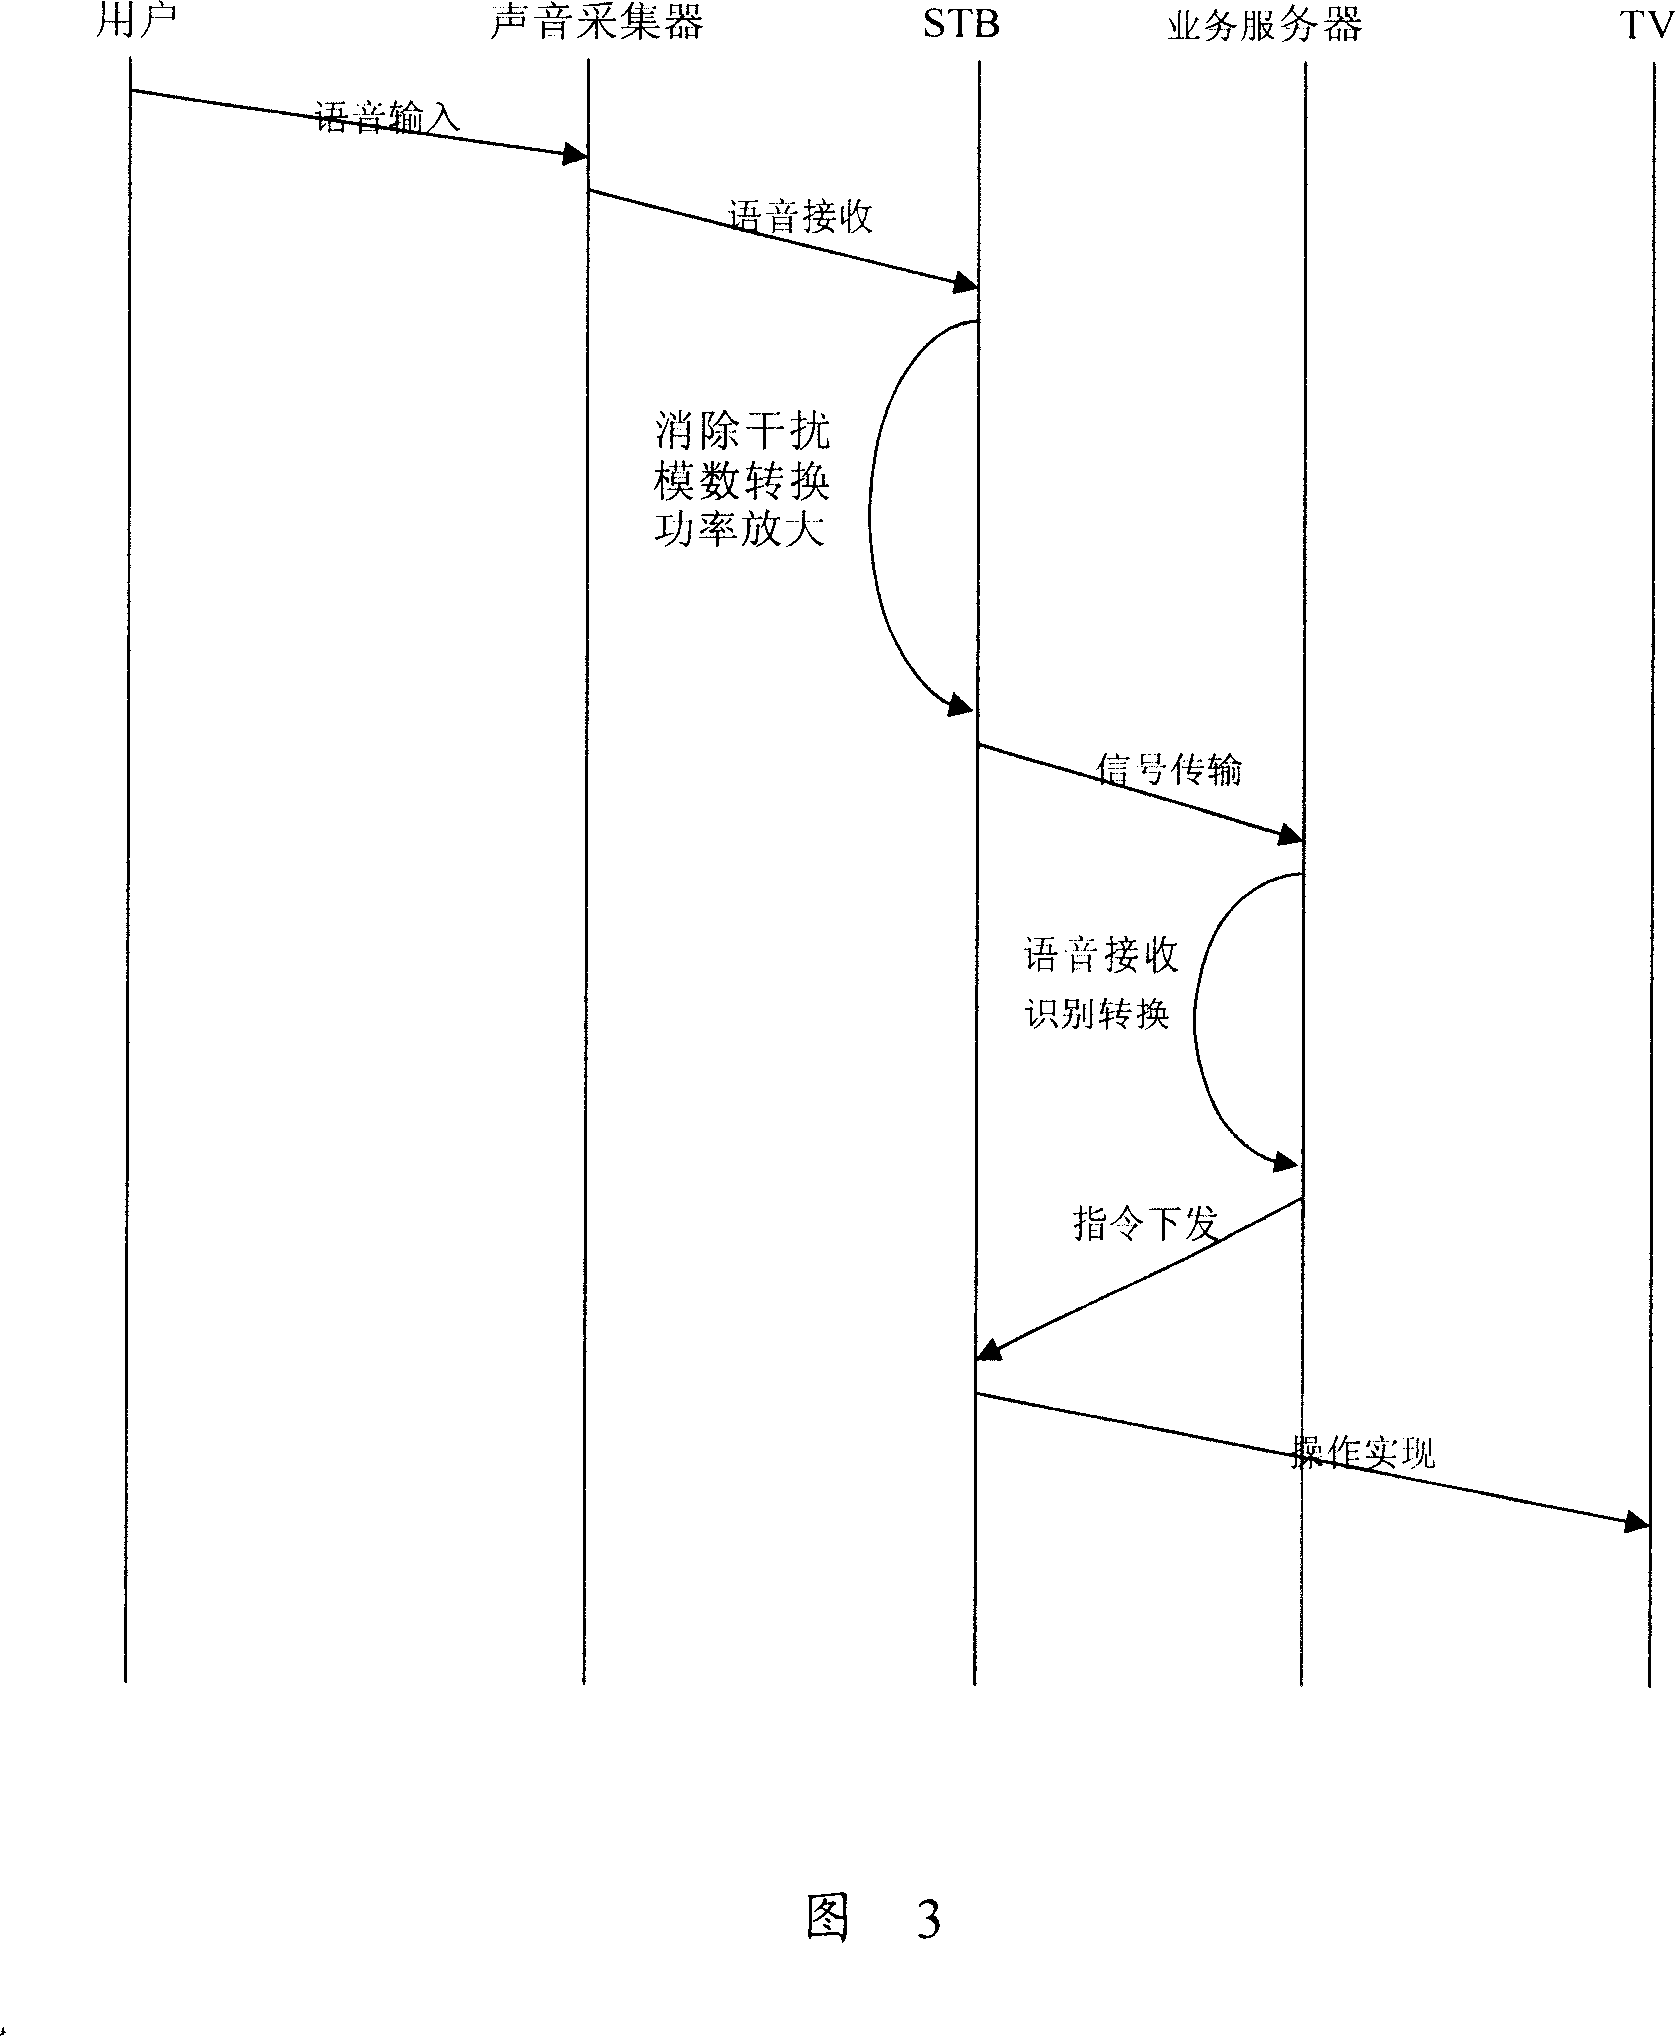 System and method for man-machine communication based on speech